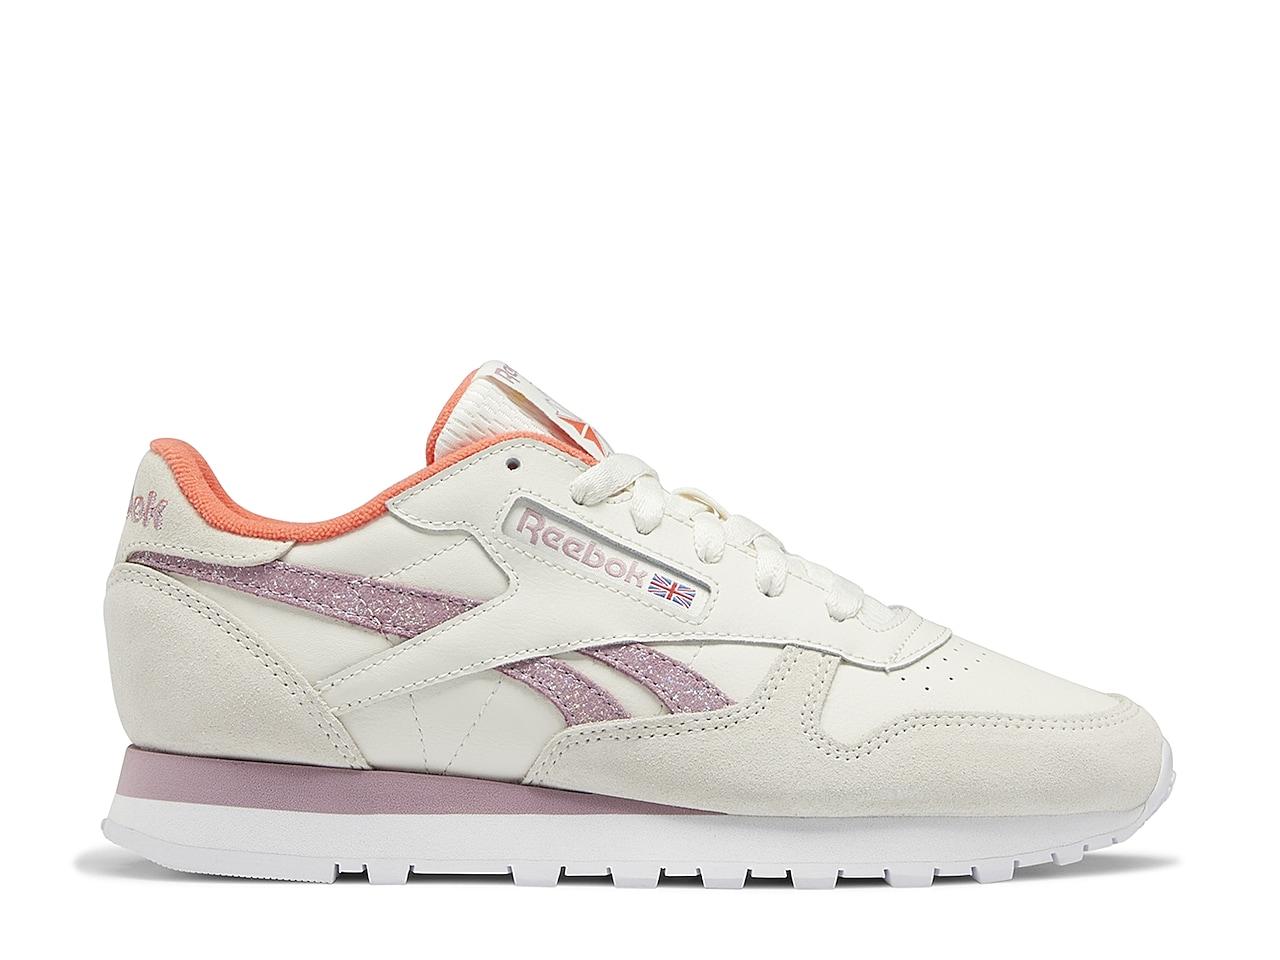 Reebok Classic Leather Heritage Sneaker in White | Lyst